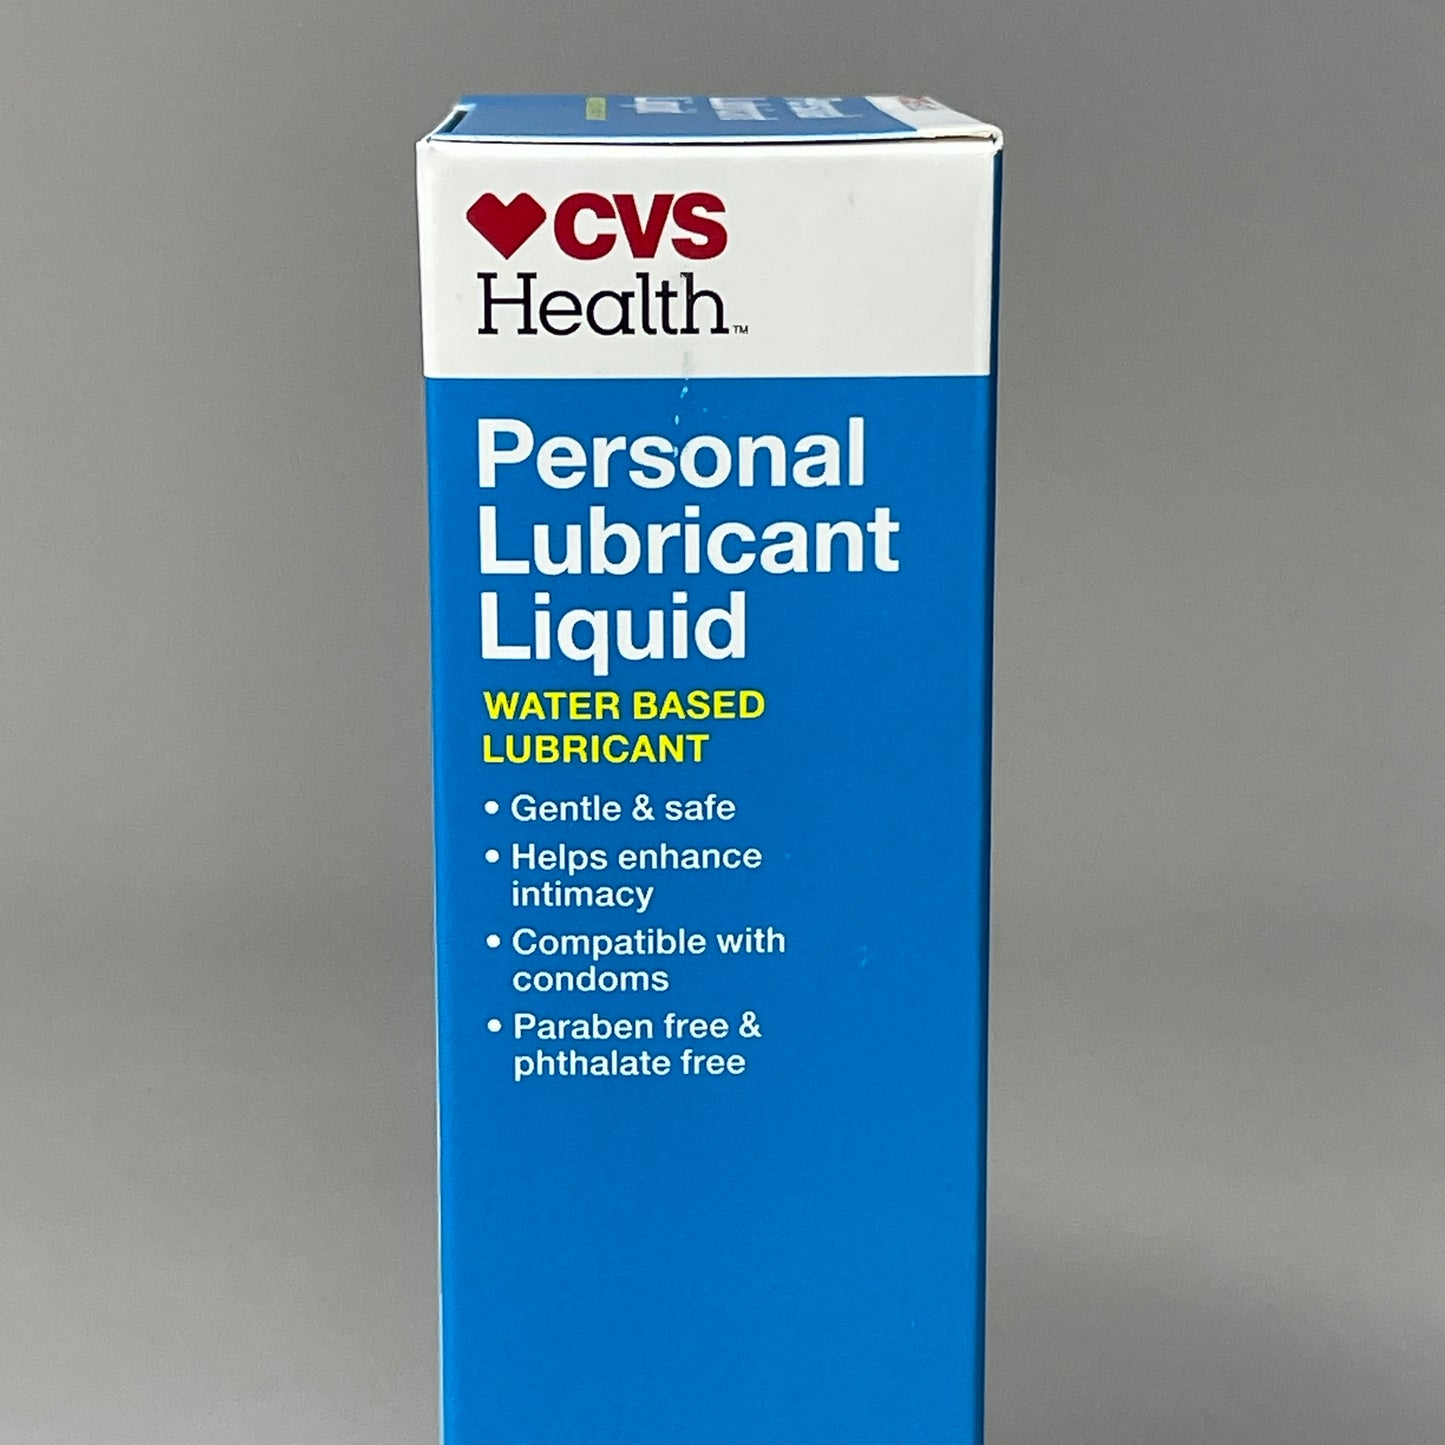 CVS HEALTH Personal Lubricant 2-PACK Water-Based 5.6 oz Exp 9/24 (New)